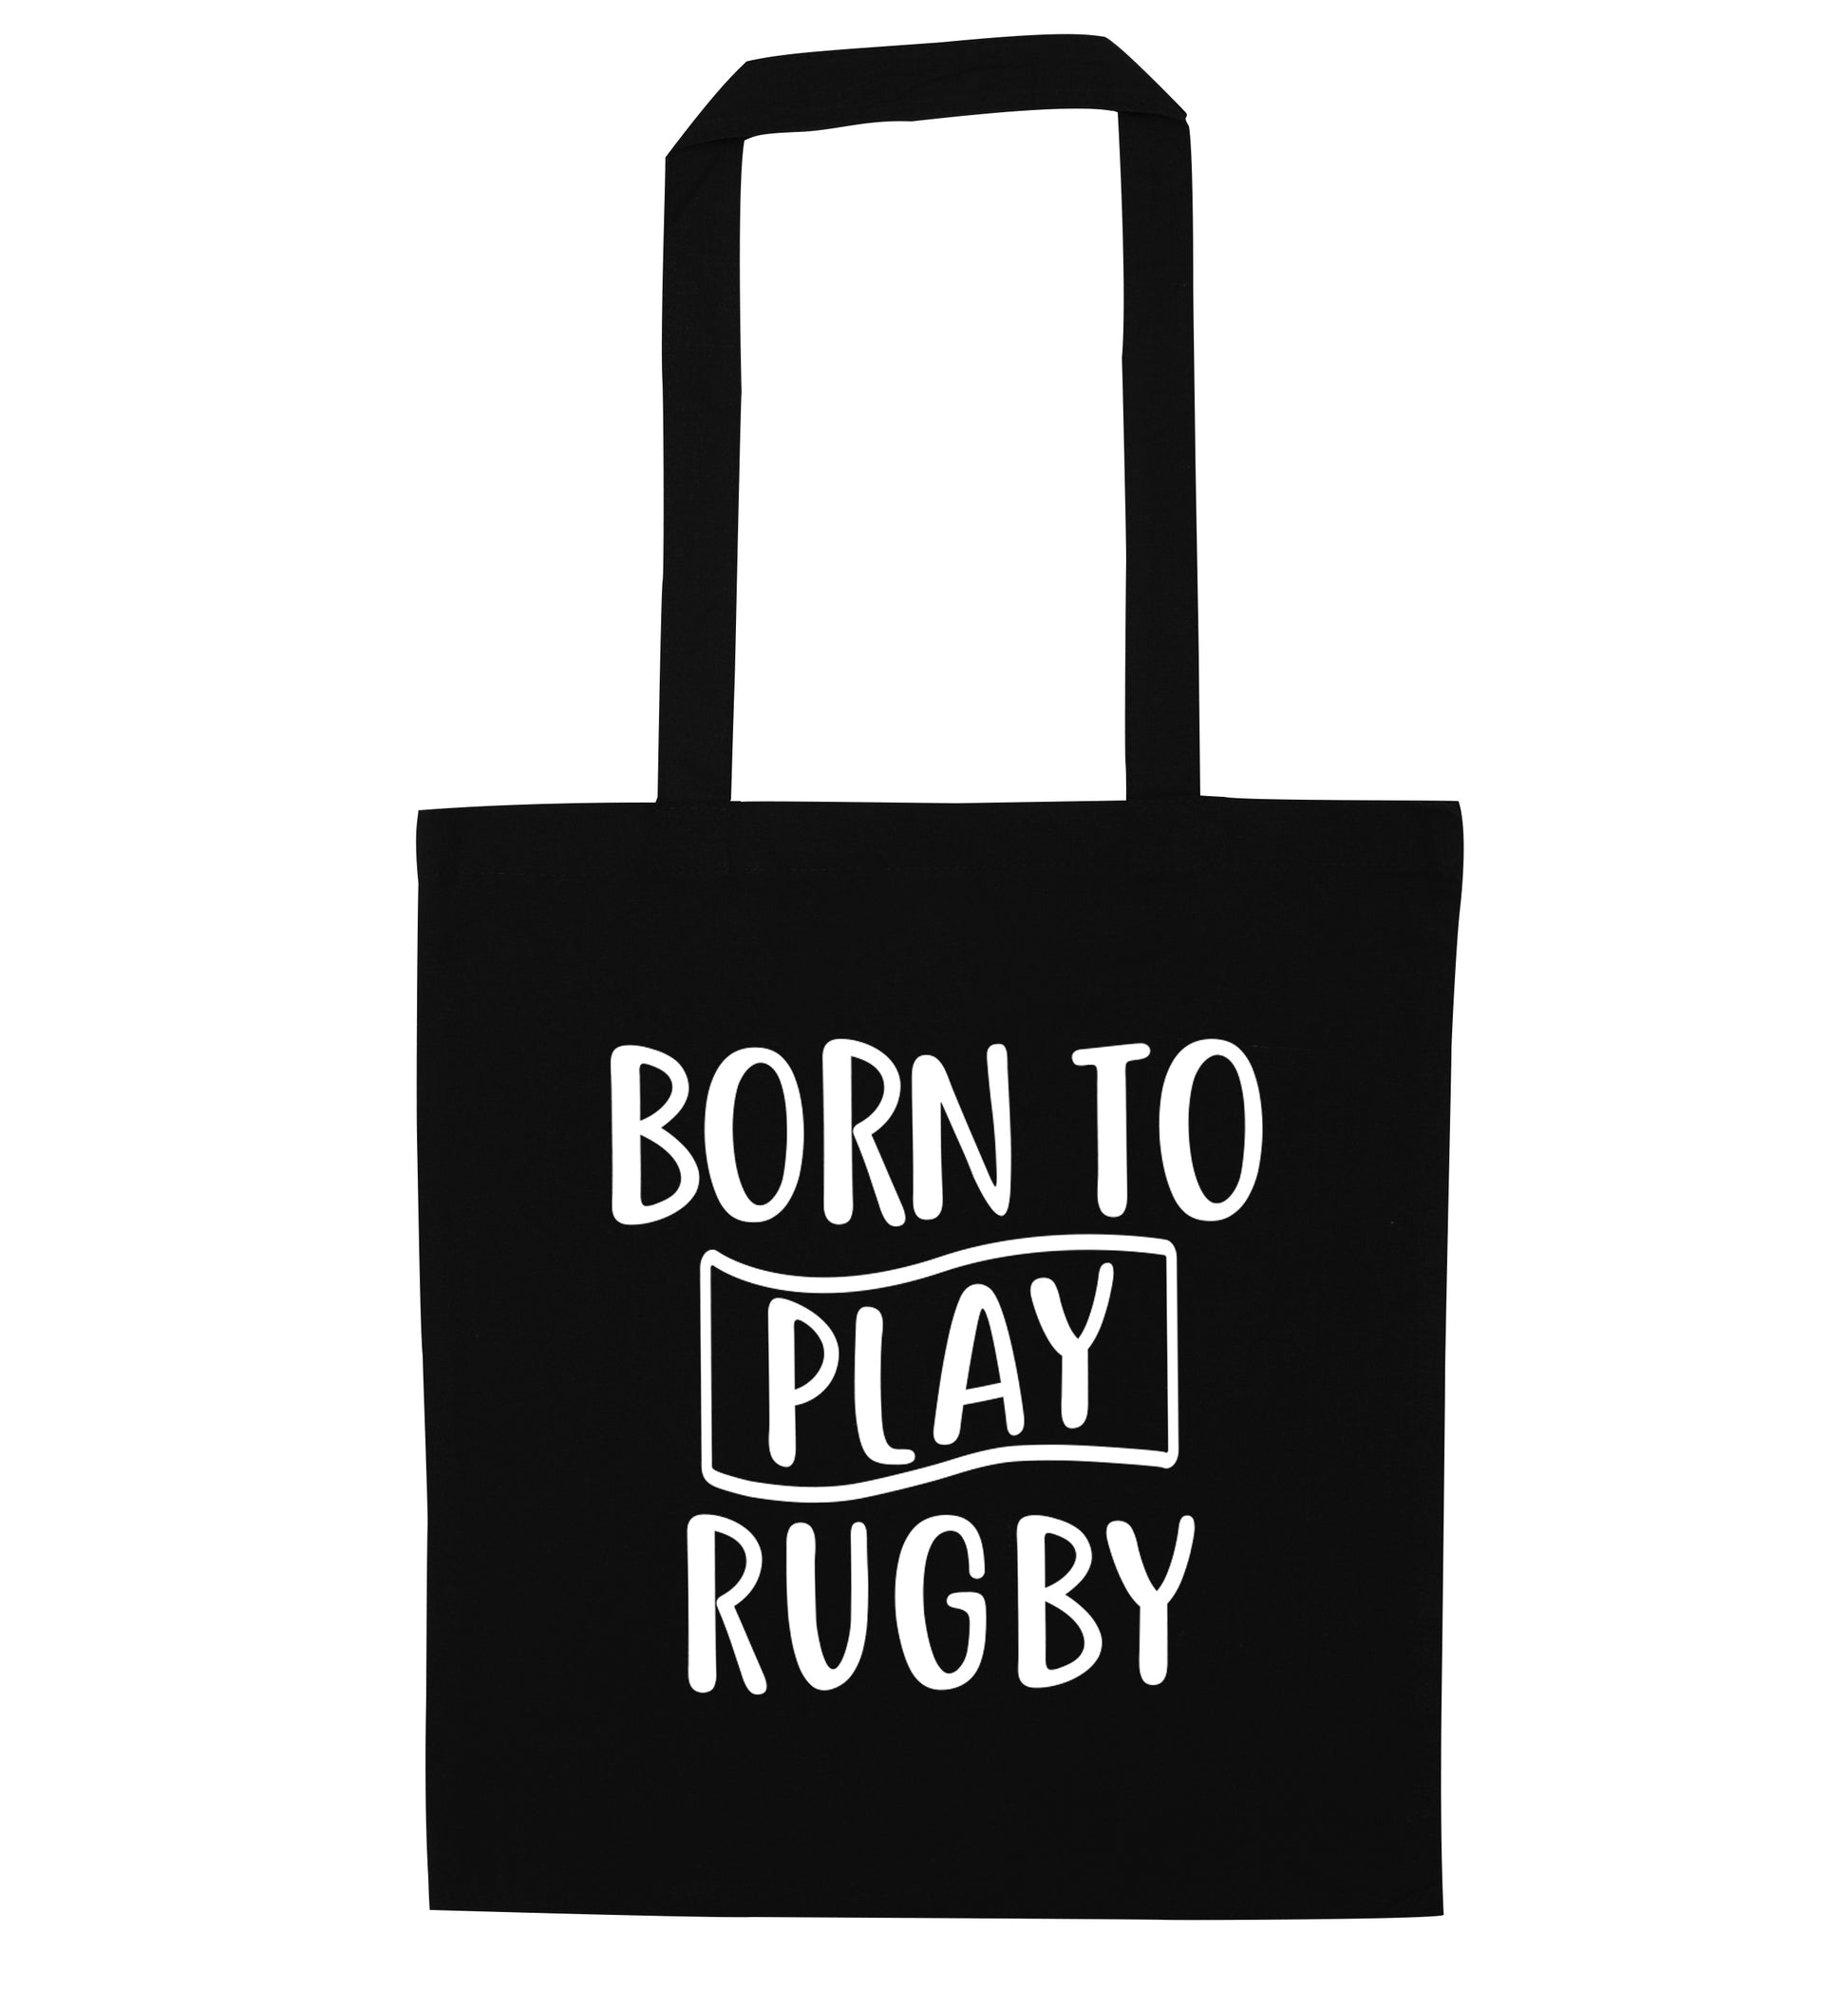 Born to play rugby black tote bag